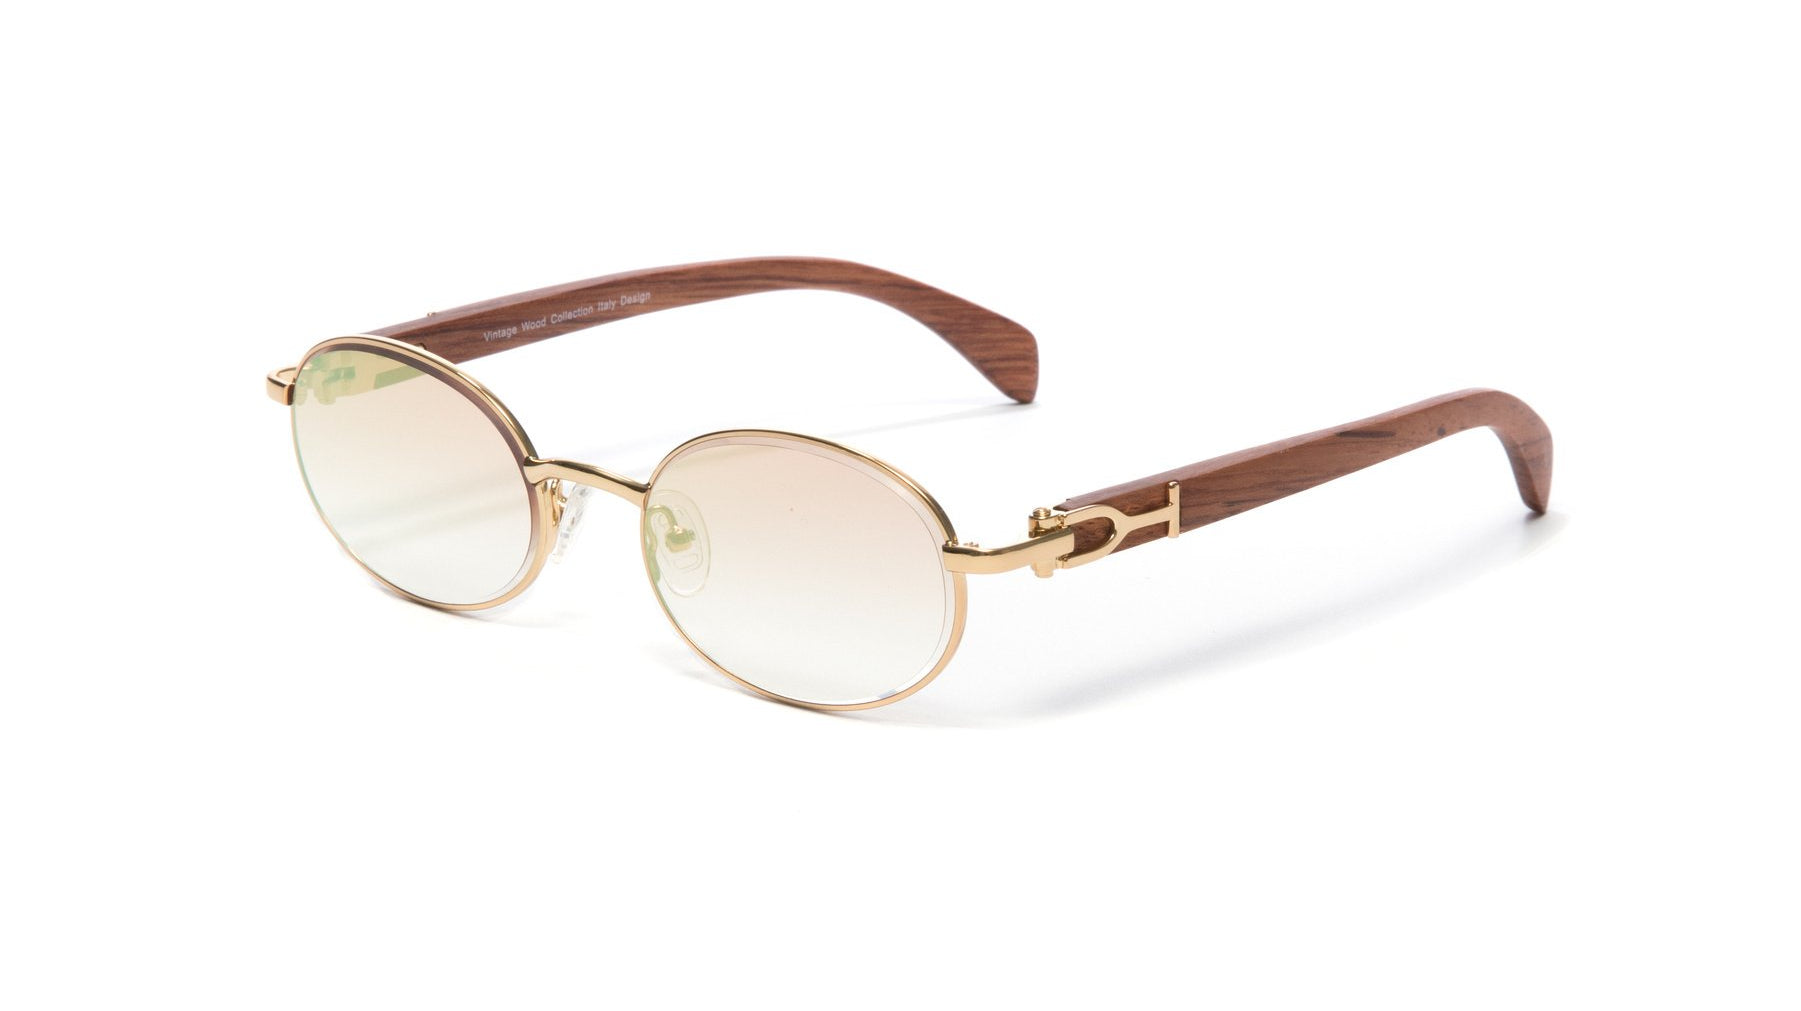 VWC Eyewear Oval Wood Sunglasses | 18kt Gold-Plated Frame | Gradient Brown Mirrored Lenses